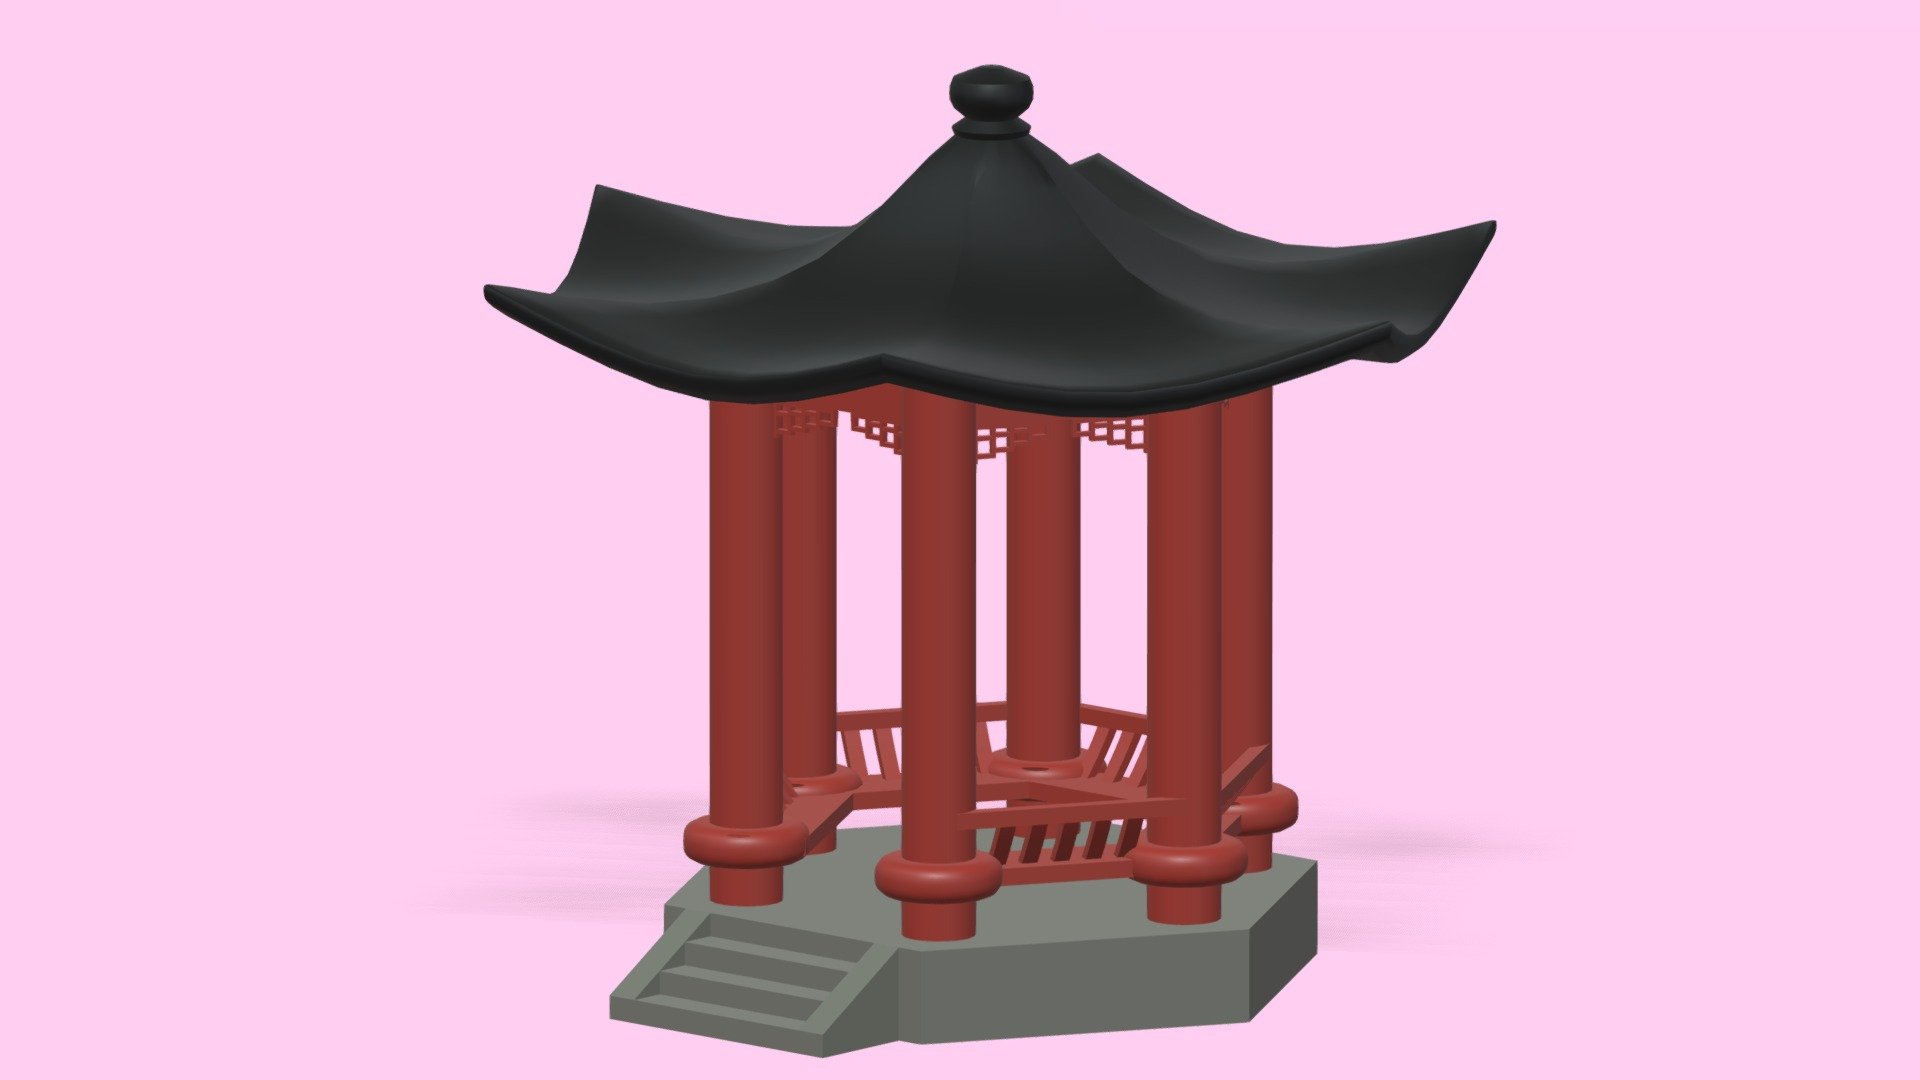 -Cartoon Chinese Pavilion.

-This product contains 1 object.

-Total Vertices: 5,164 , Polygons: 4,523.

-This product was created in Blender 2.8.

-Formats: blend, fbx, obj, c4d, dae, abc, stl, glb, unitypackage.

-We hope you enjoy this model.

-Thank you 3d model